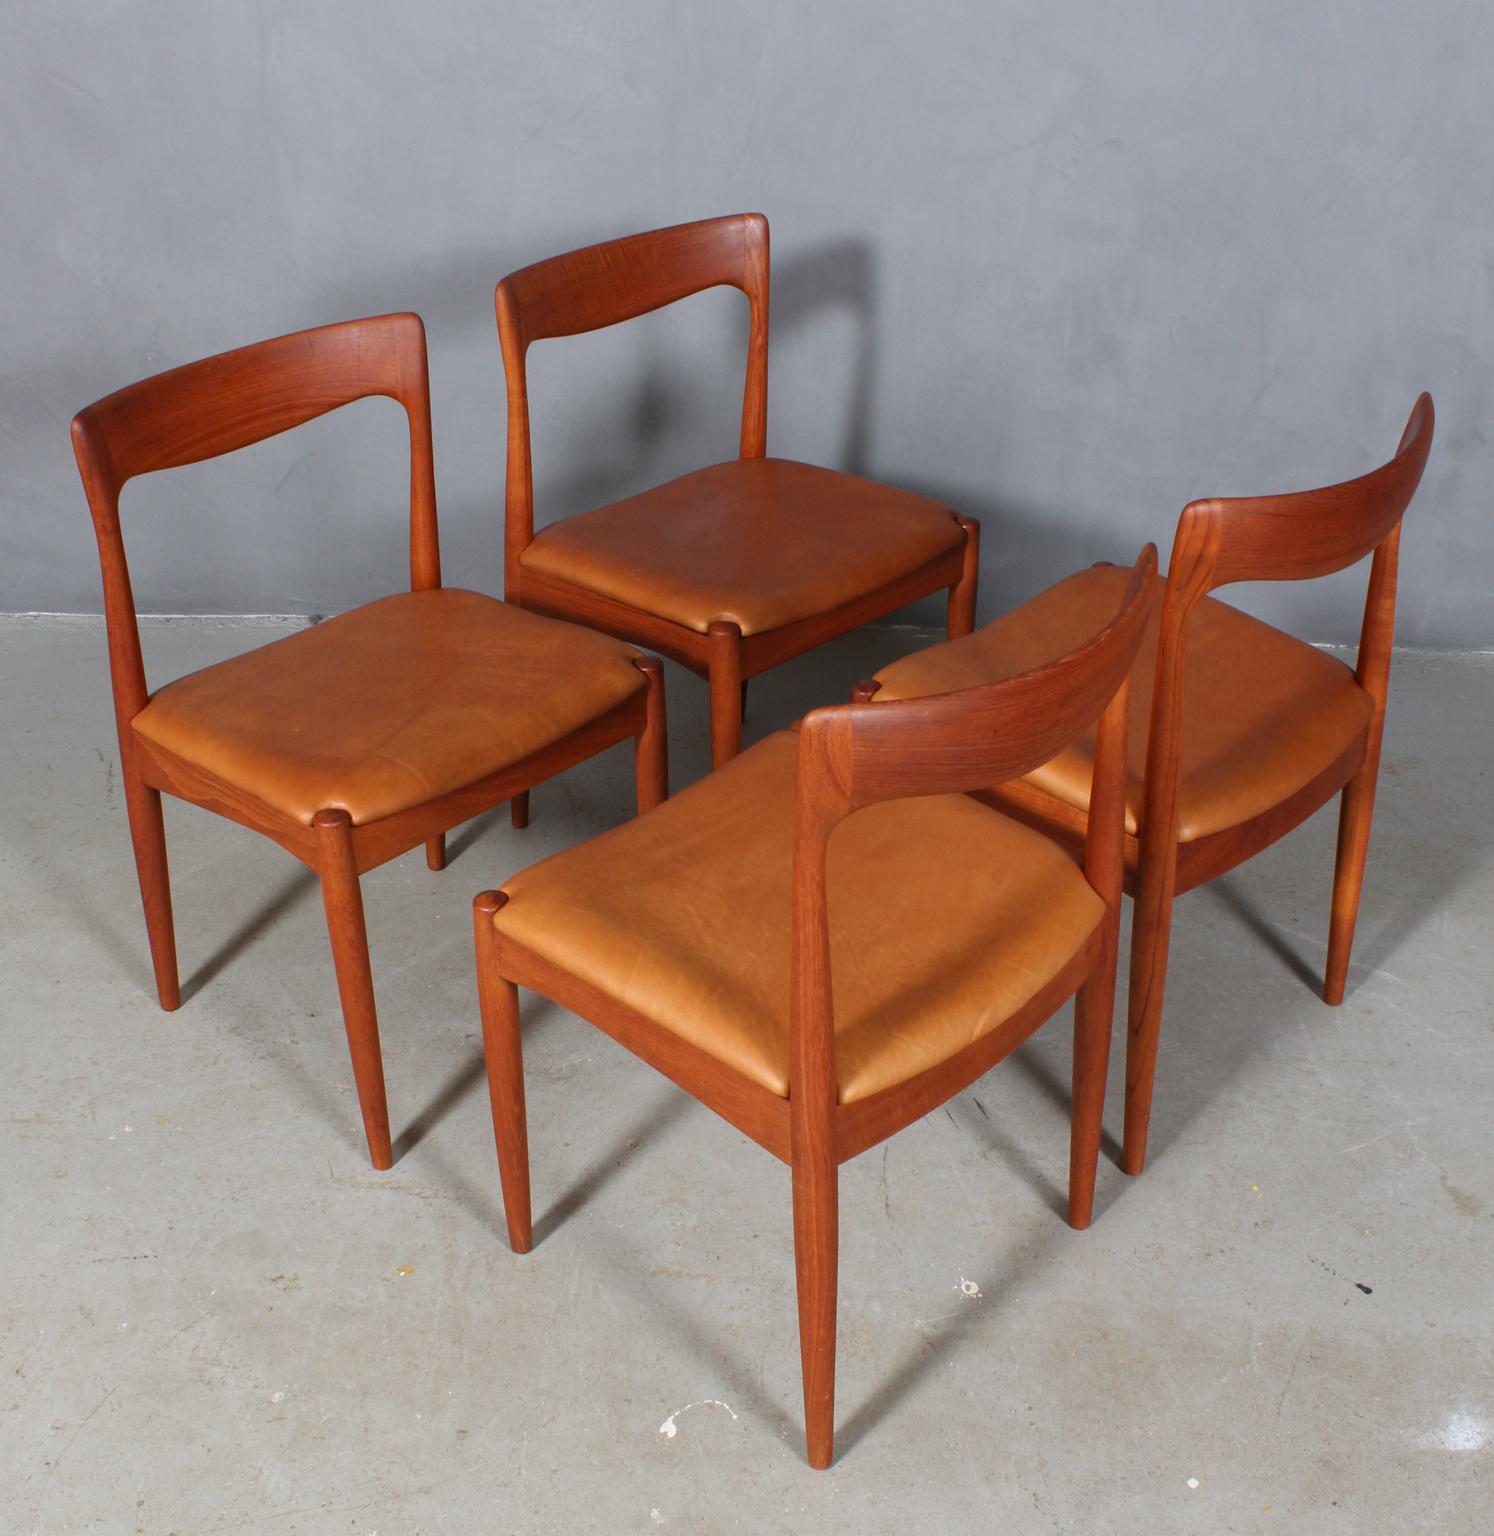 Set of four Arne Vodder dining chairs in solid teak.

New upholstered seats with tan aniline leather.

Made by Vamo.